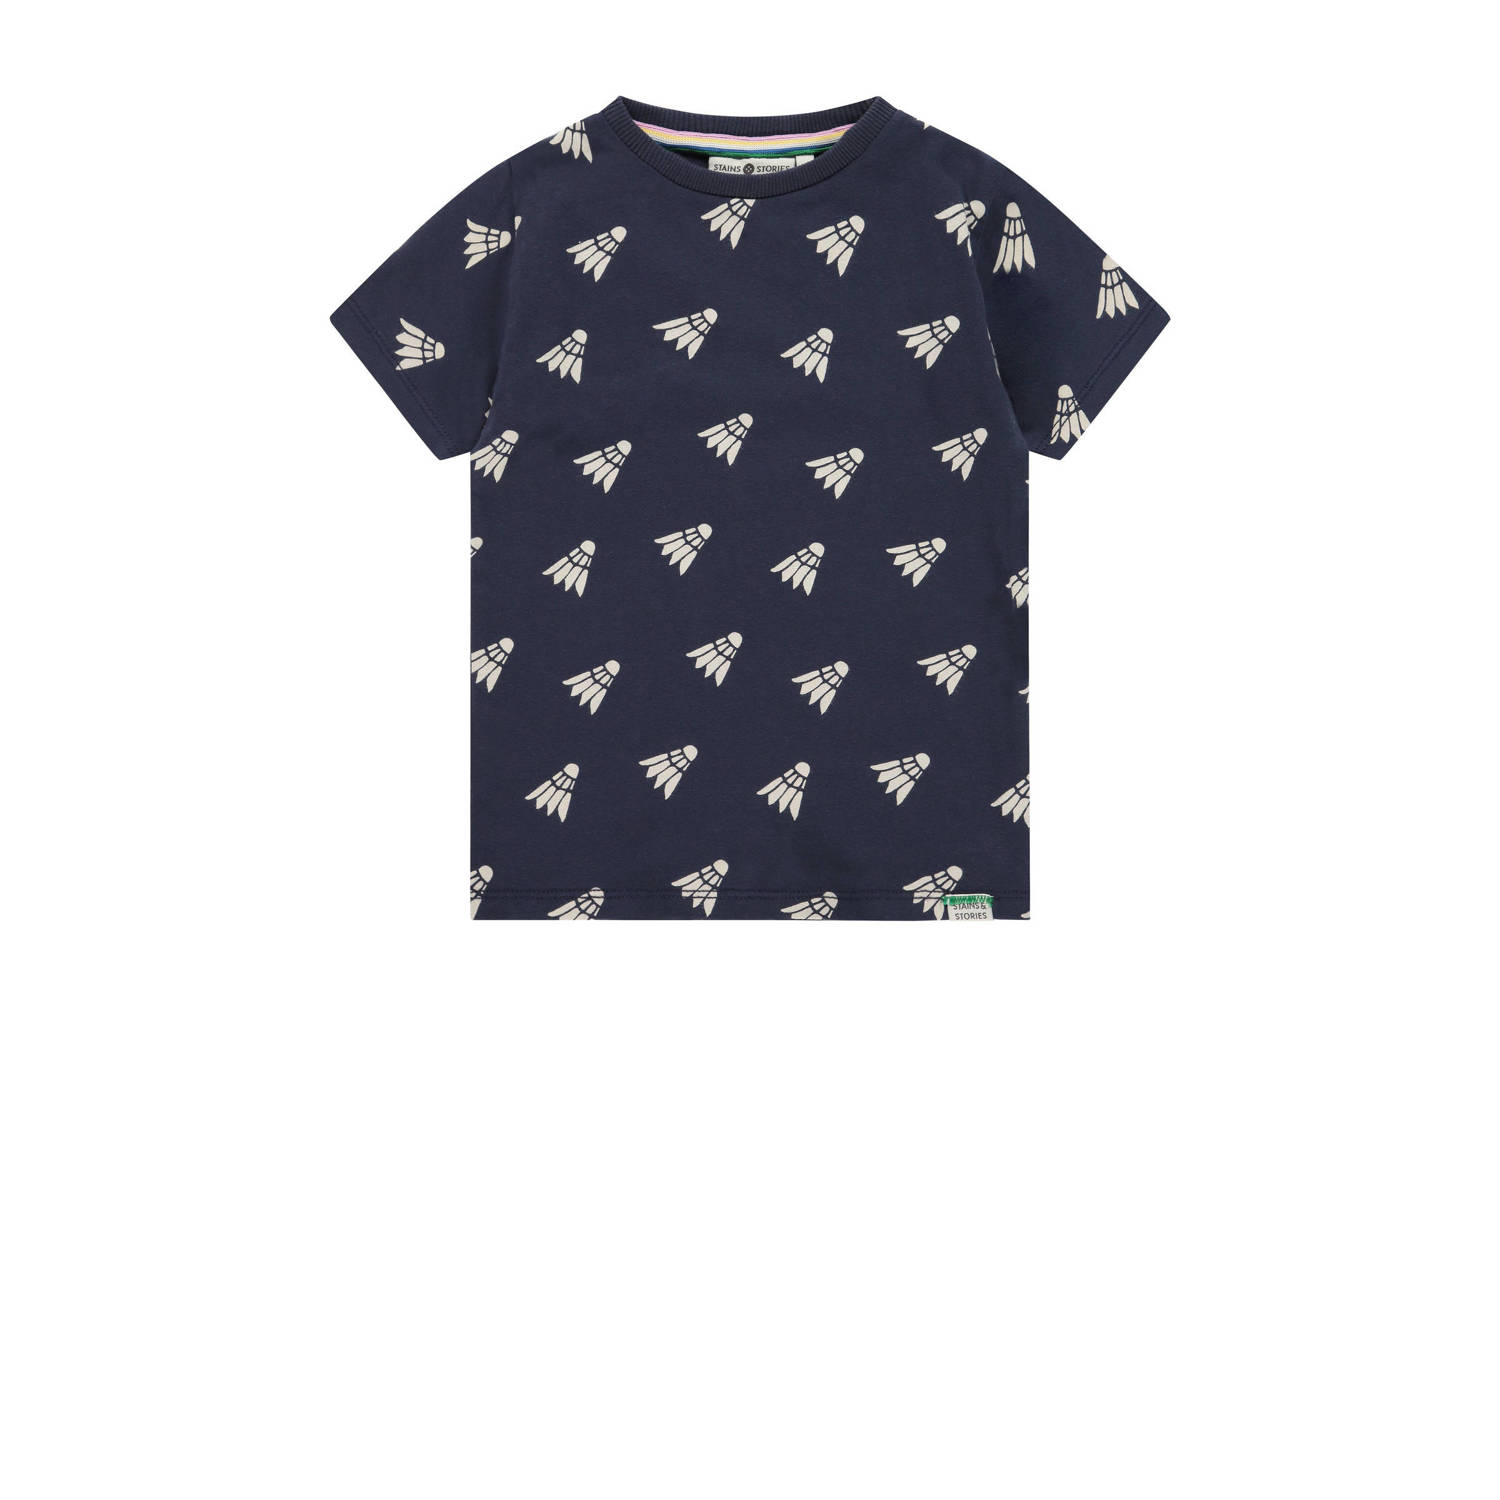 Stains&Stories T-shirt met all over print donkerblauw ecru